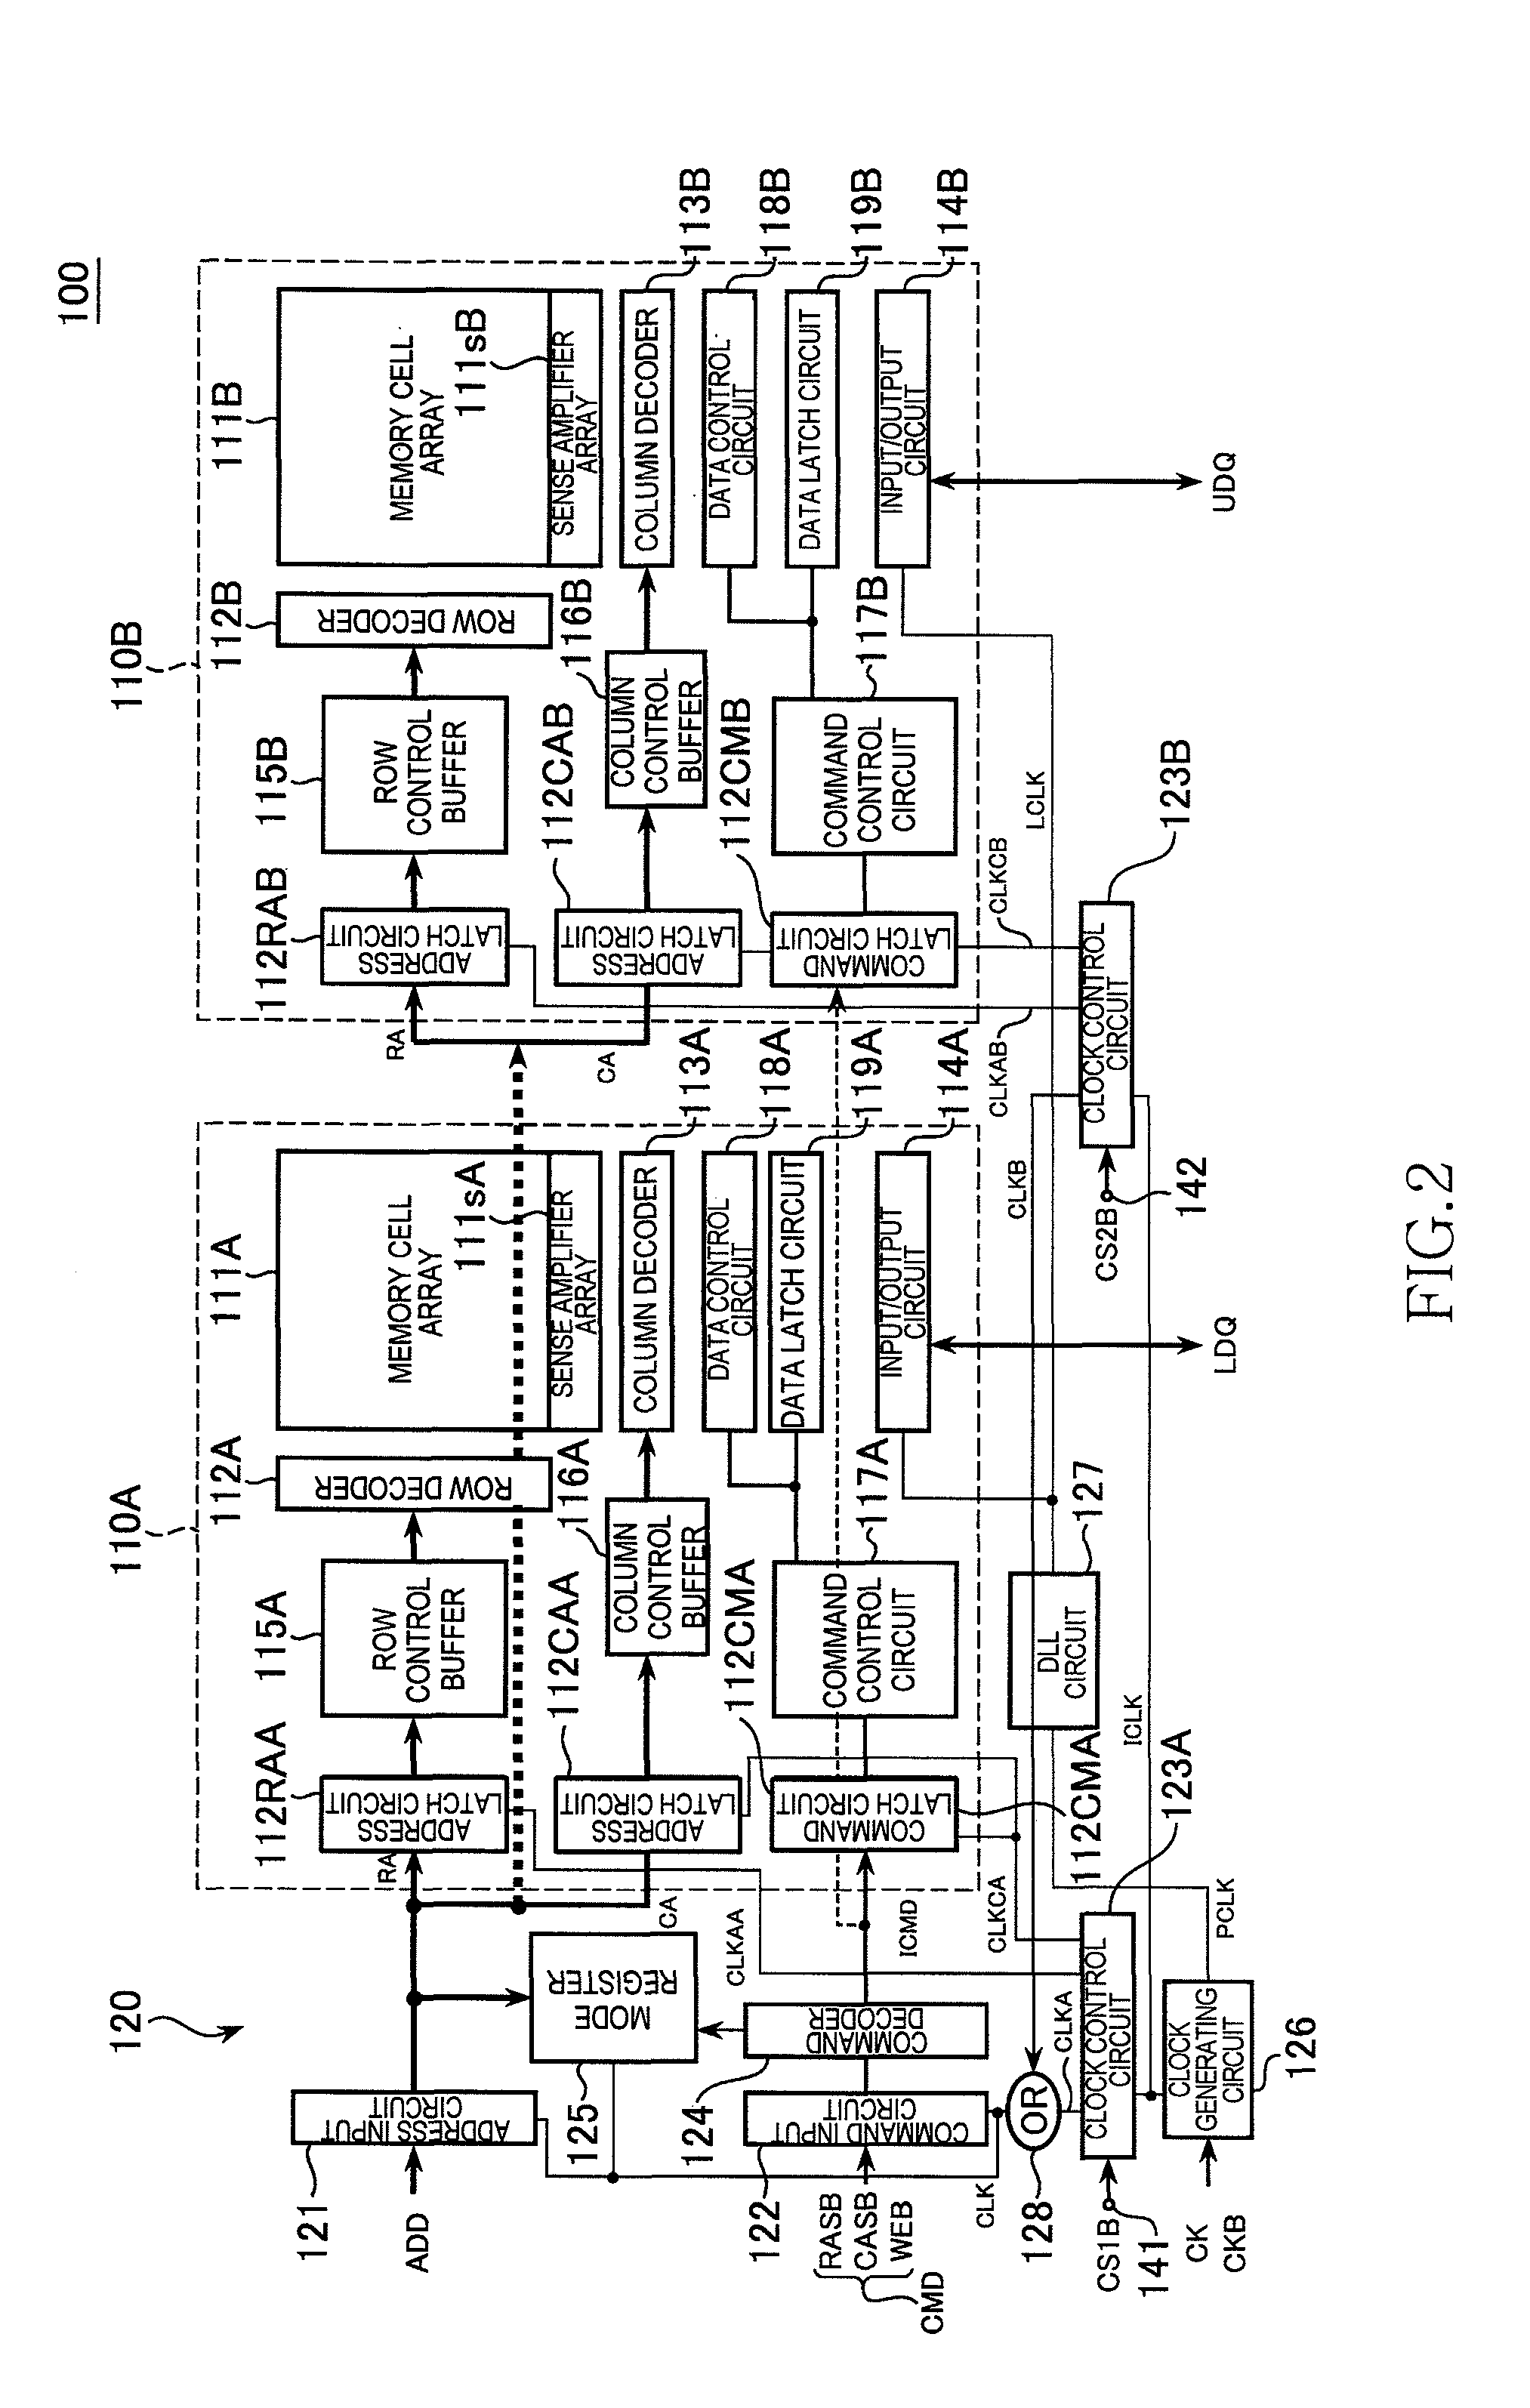 Semiconductor memory device, information processing system including the same, and controller